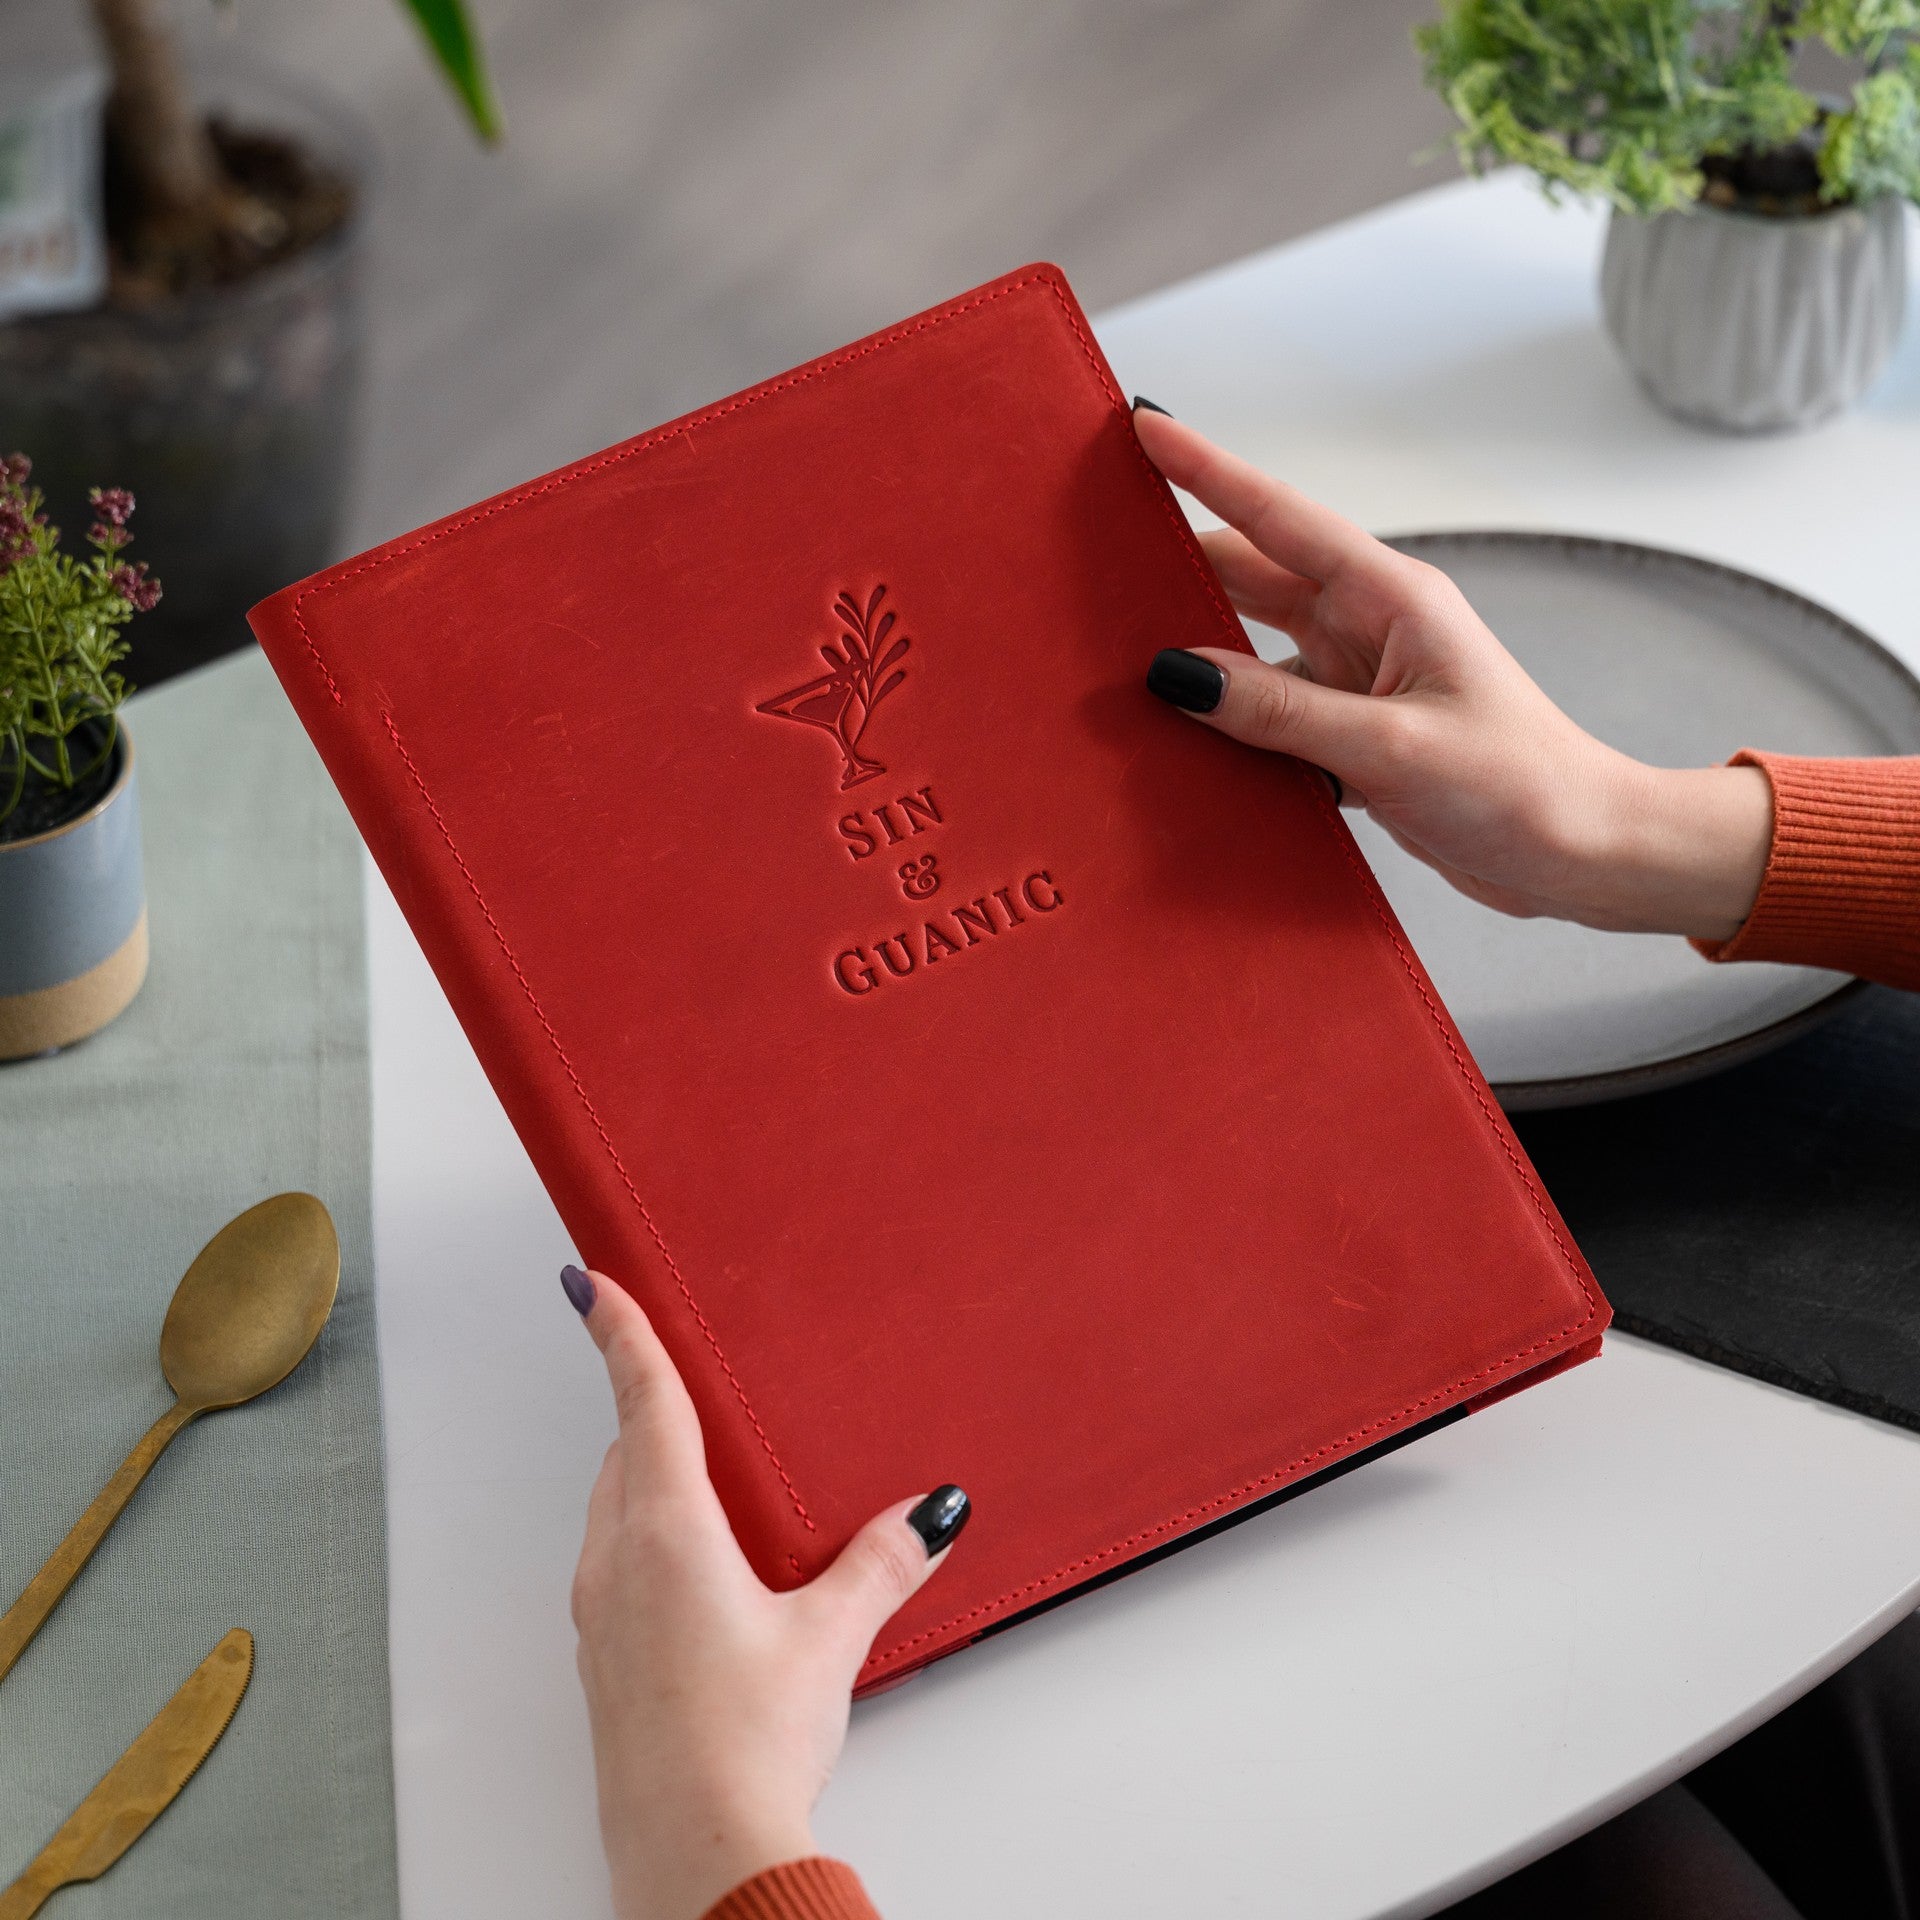 Elegant Leather Restaurant Menu Folder, enhancing your dining atmosphere with its refined charm and impeccable craftsmanship.